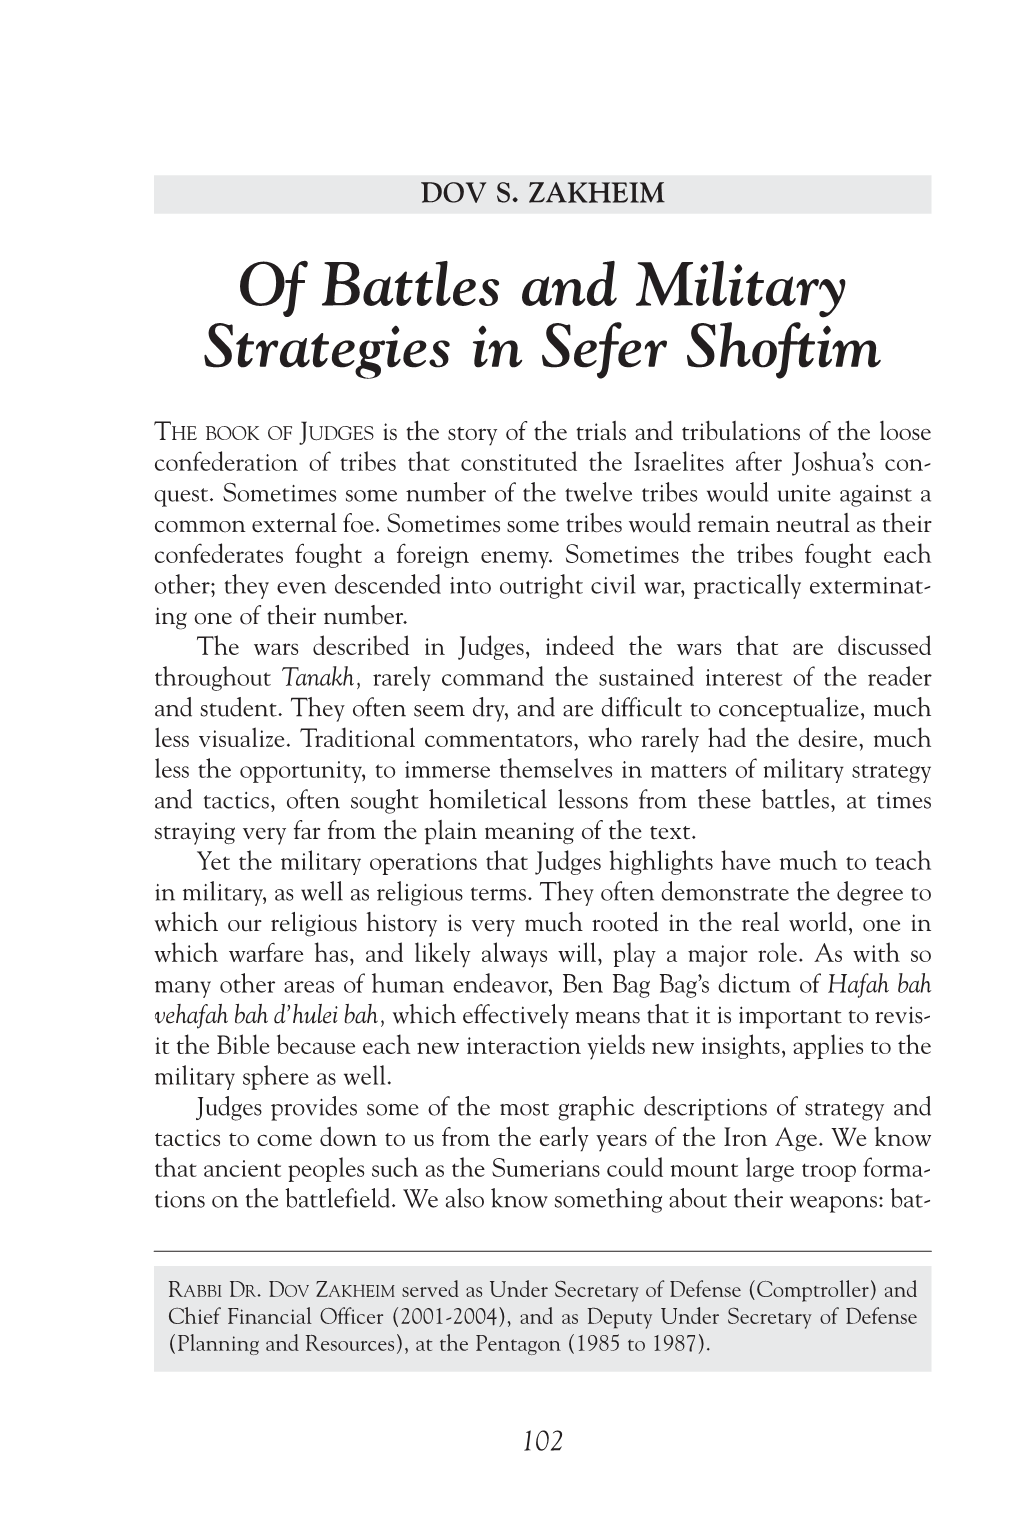 Of Battles and Military Strategies in Sefer Shoftim